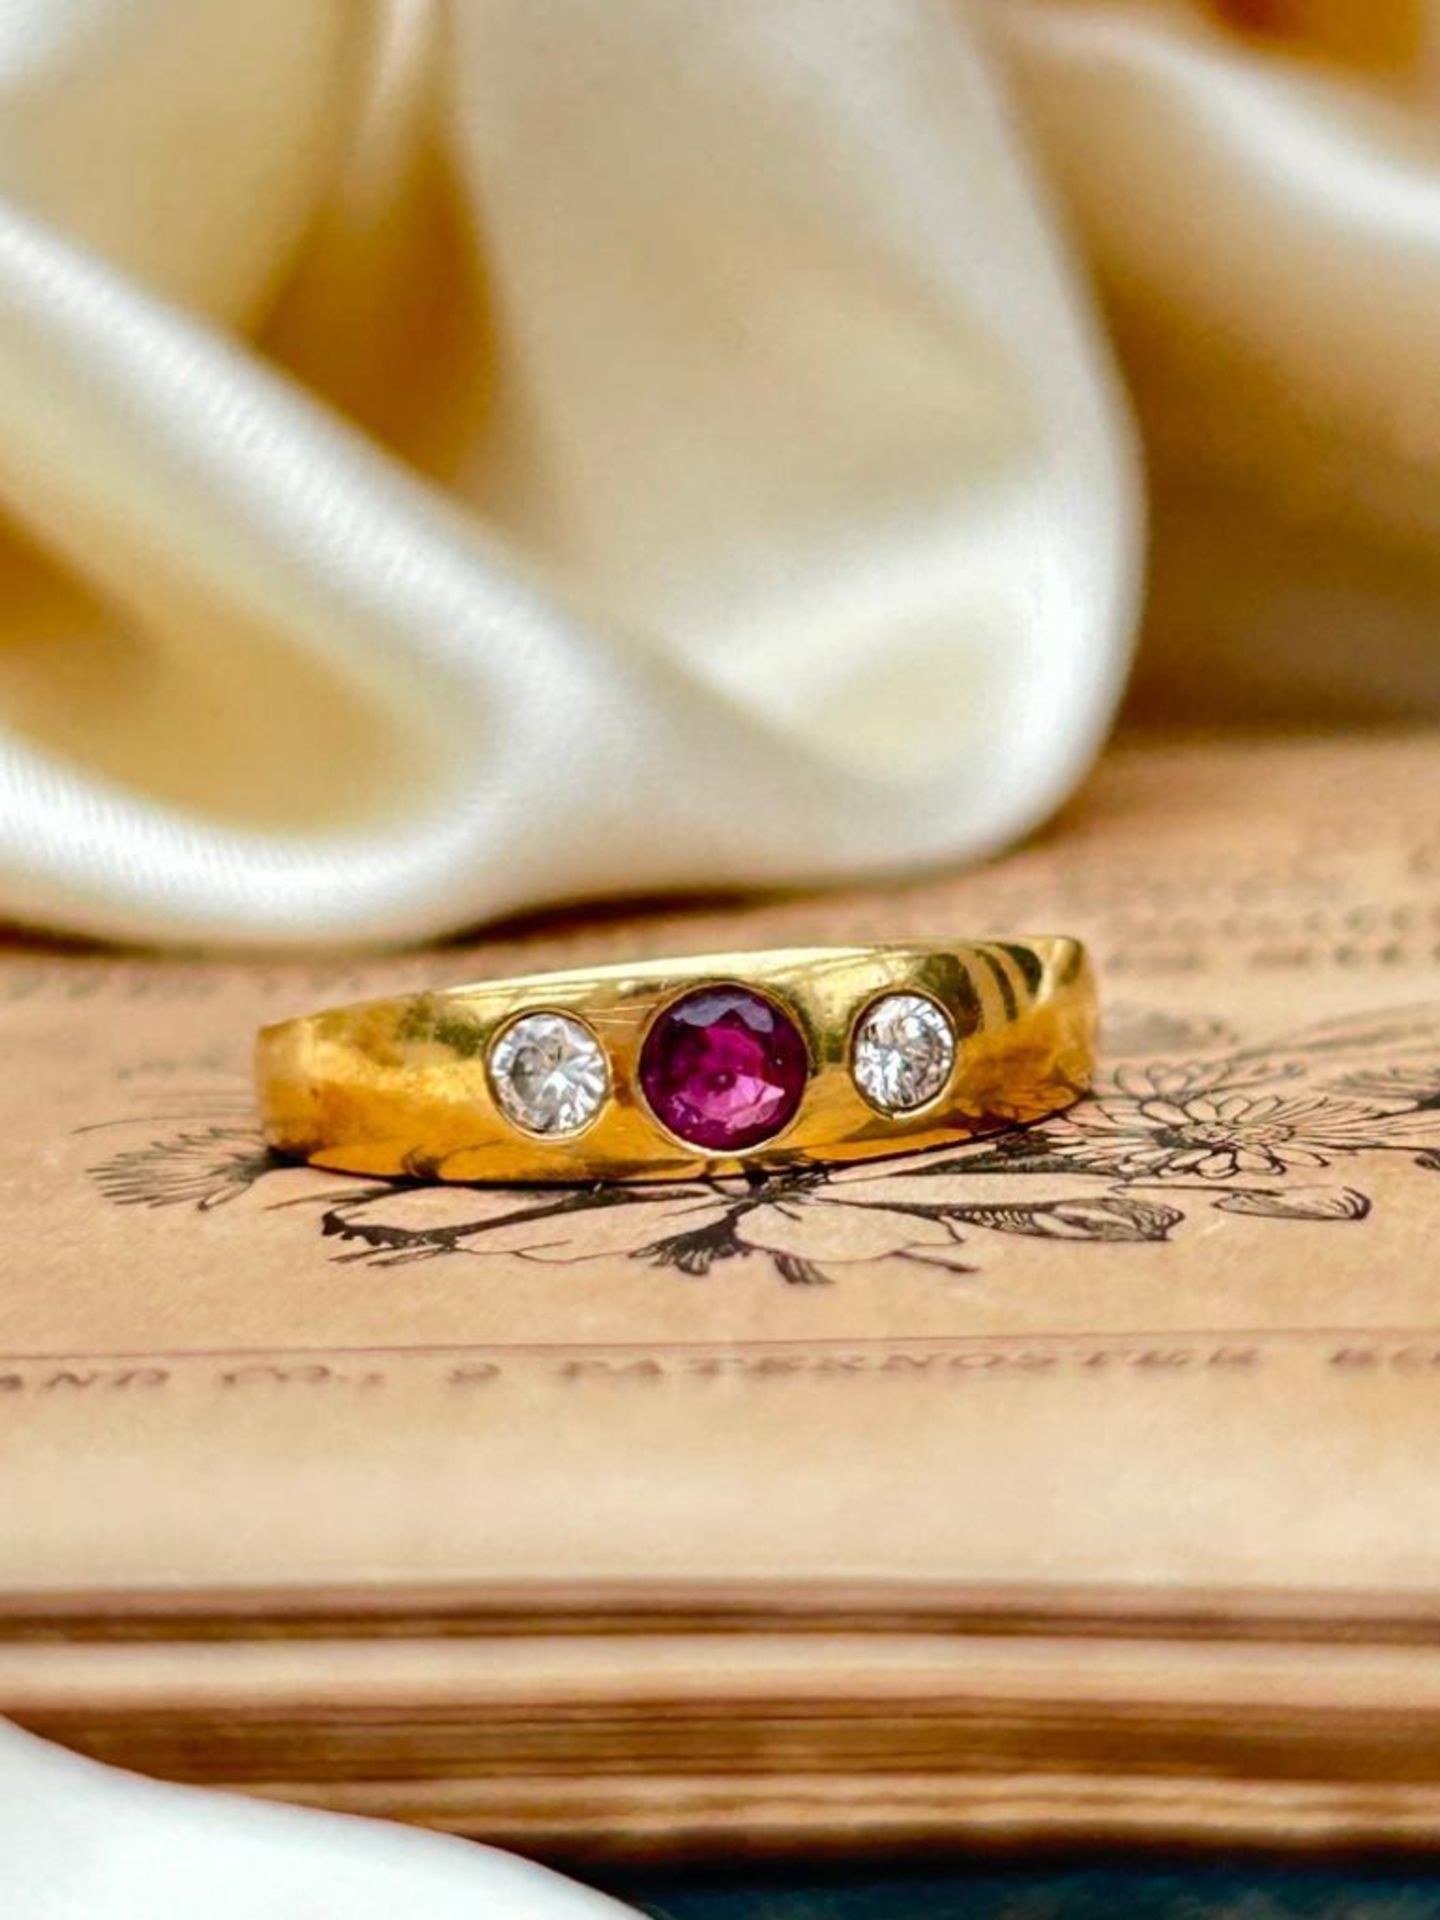 14ct Yellow Gold Ruby and Diamond 3 Stone Ring - Image 8 of 8